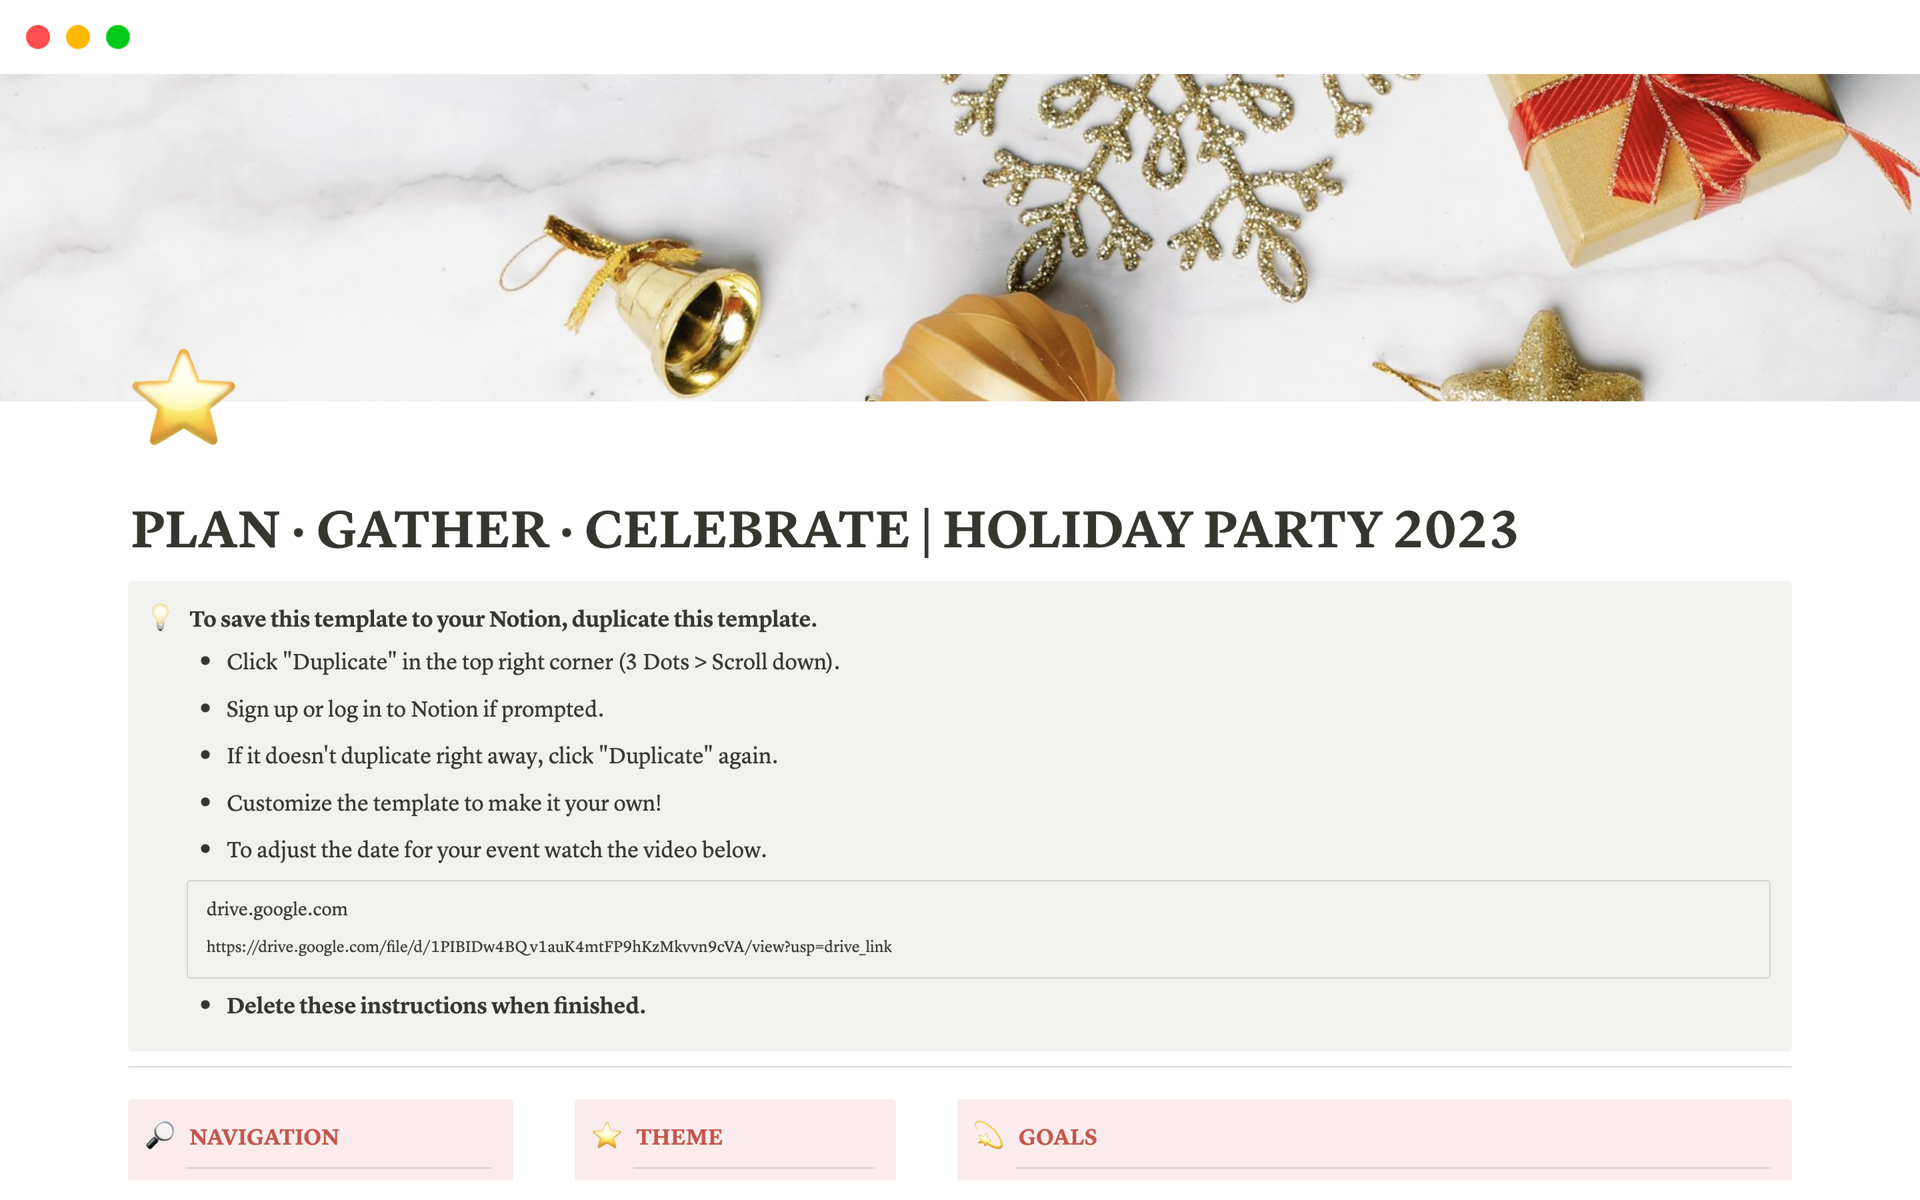 Plan your next event with ease using this customizable Notion party planner! 